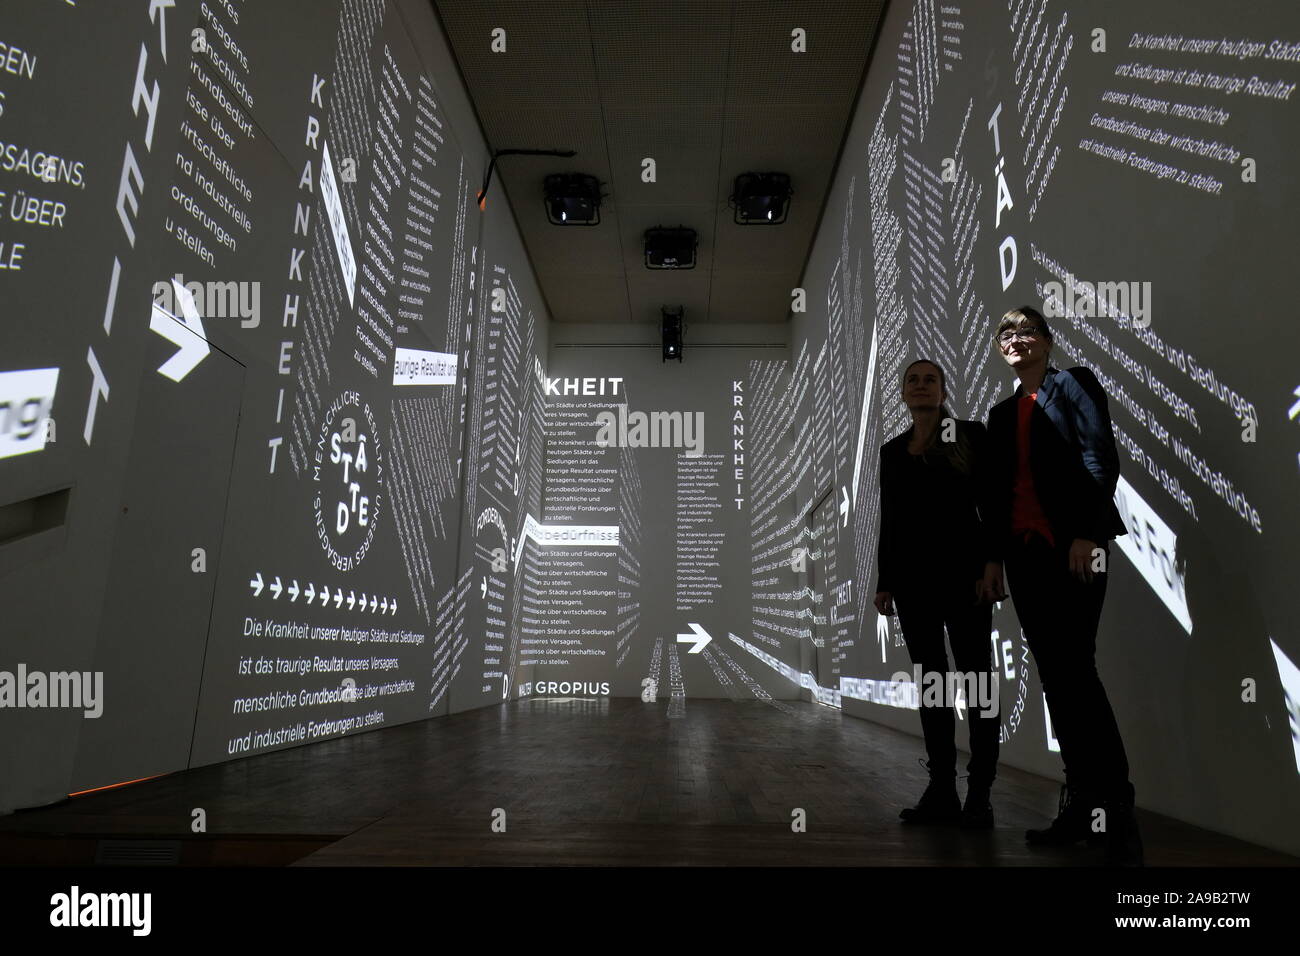 Halle, Germany. 14th Nov, 2019. The artists Claudia Dölling (l) and Anja Krämer stand in the rooms of the Kunststiftung Sachsen-Anhalt, while their media installation 'Typo Utopia' is projected. The presentation on the occasion of the 100th anniversary of the Bauhaus can be seen from 20.12 to 22.12.2019. Credit: Sebastian Willnow/dpa-Zentralbild/ZB/dpa/Alamy Live News Stock Photo